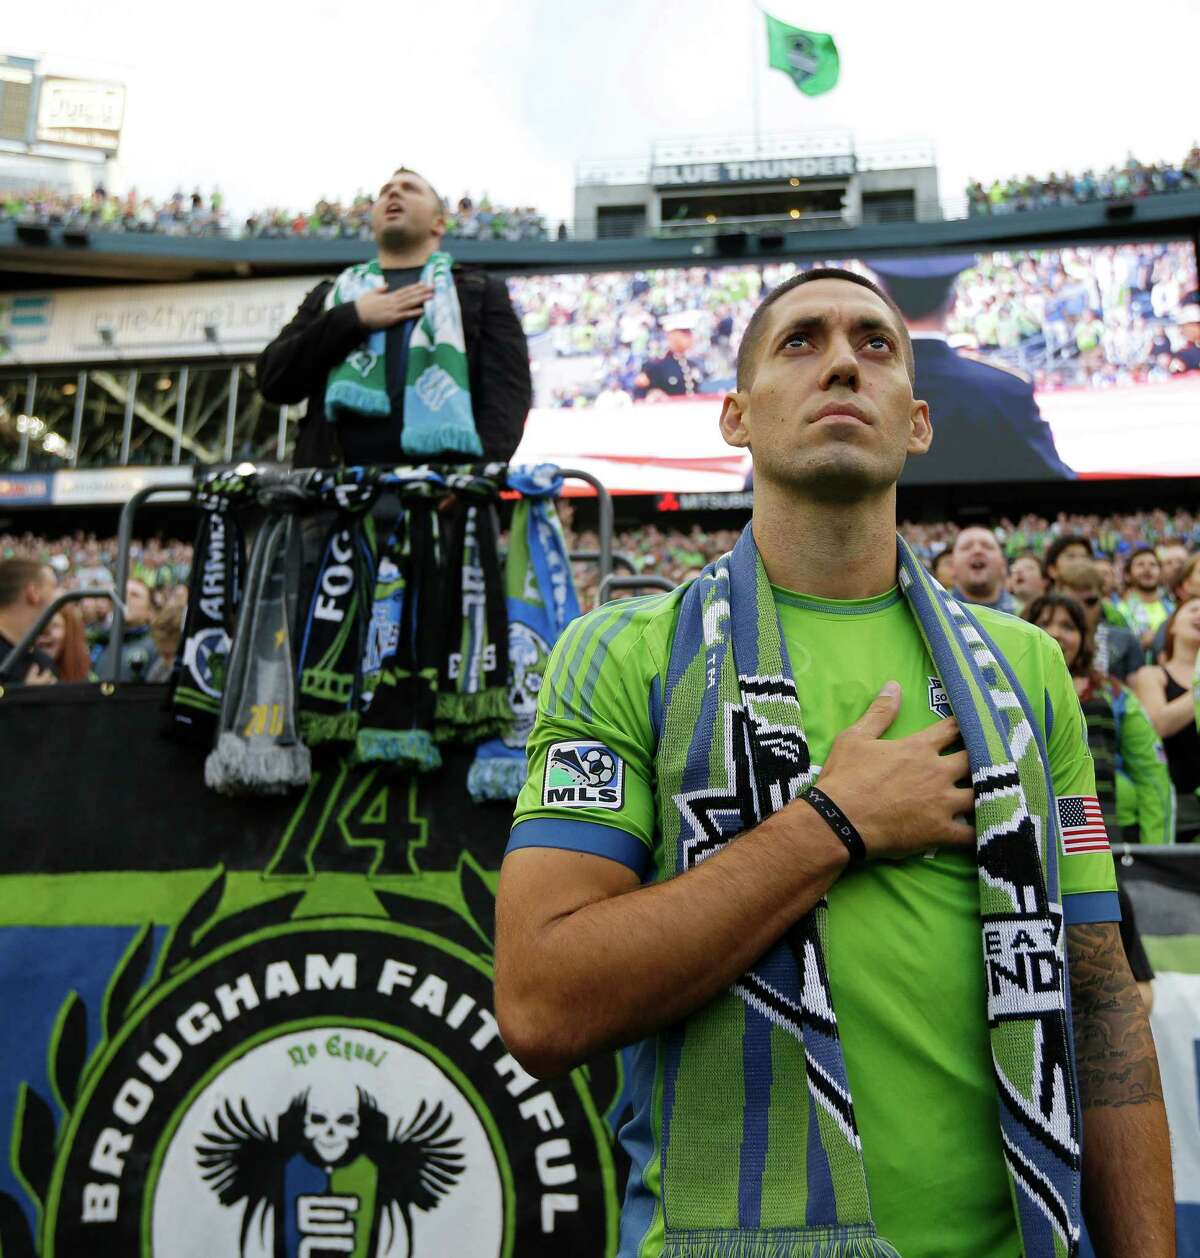 The impressive attendance record by the Seattle Sounders and its fan support makes Washington the no. 1 soccer-loving state.